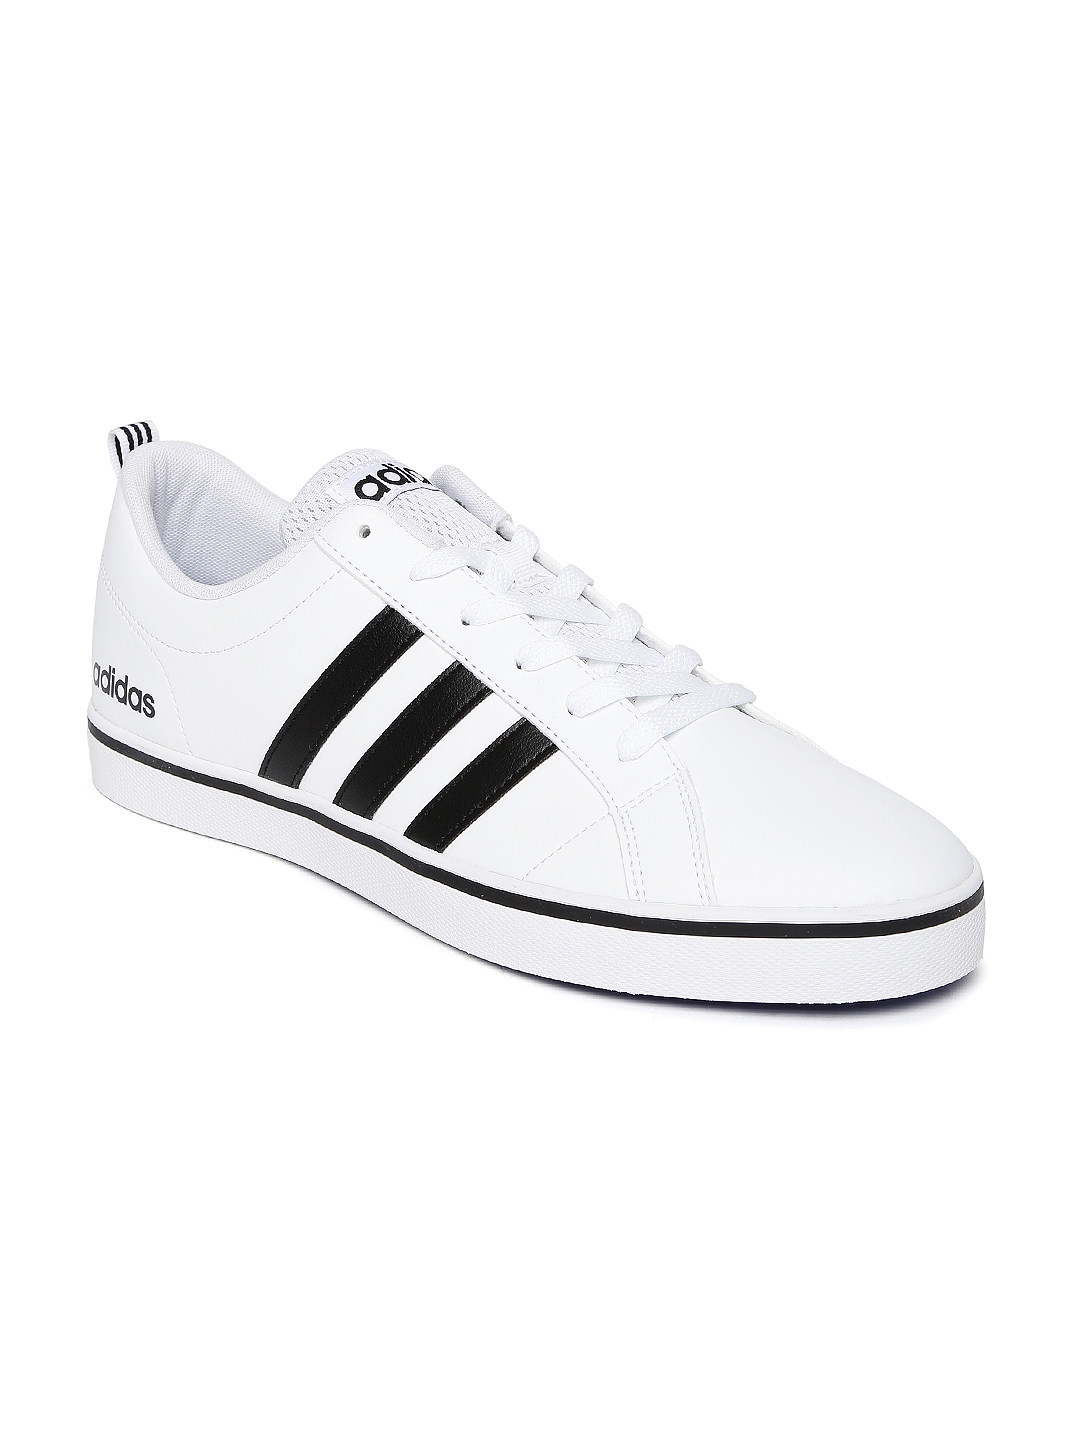 Buy ADIDAS NEO Men White Solid Pace VS Skateboarding Shoes - Sports ...